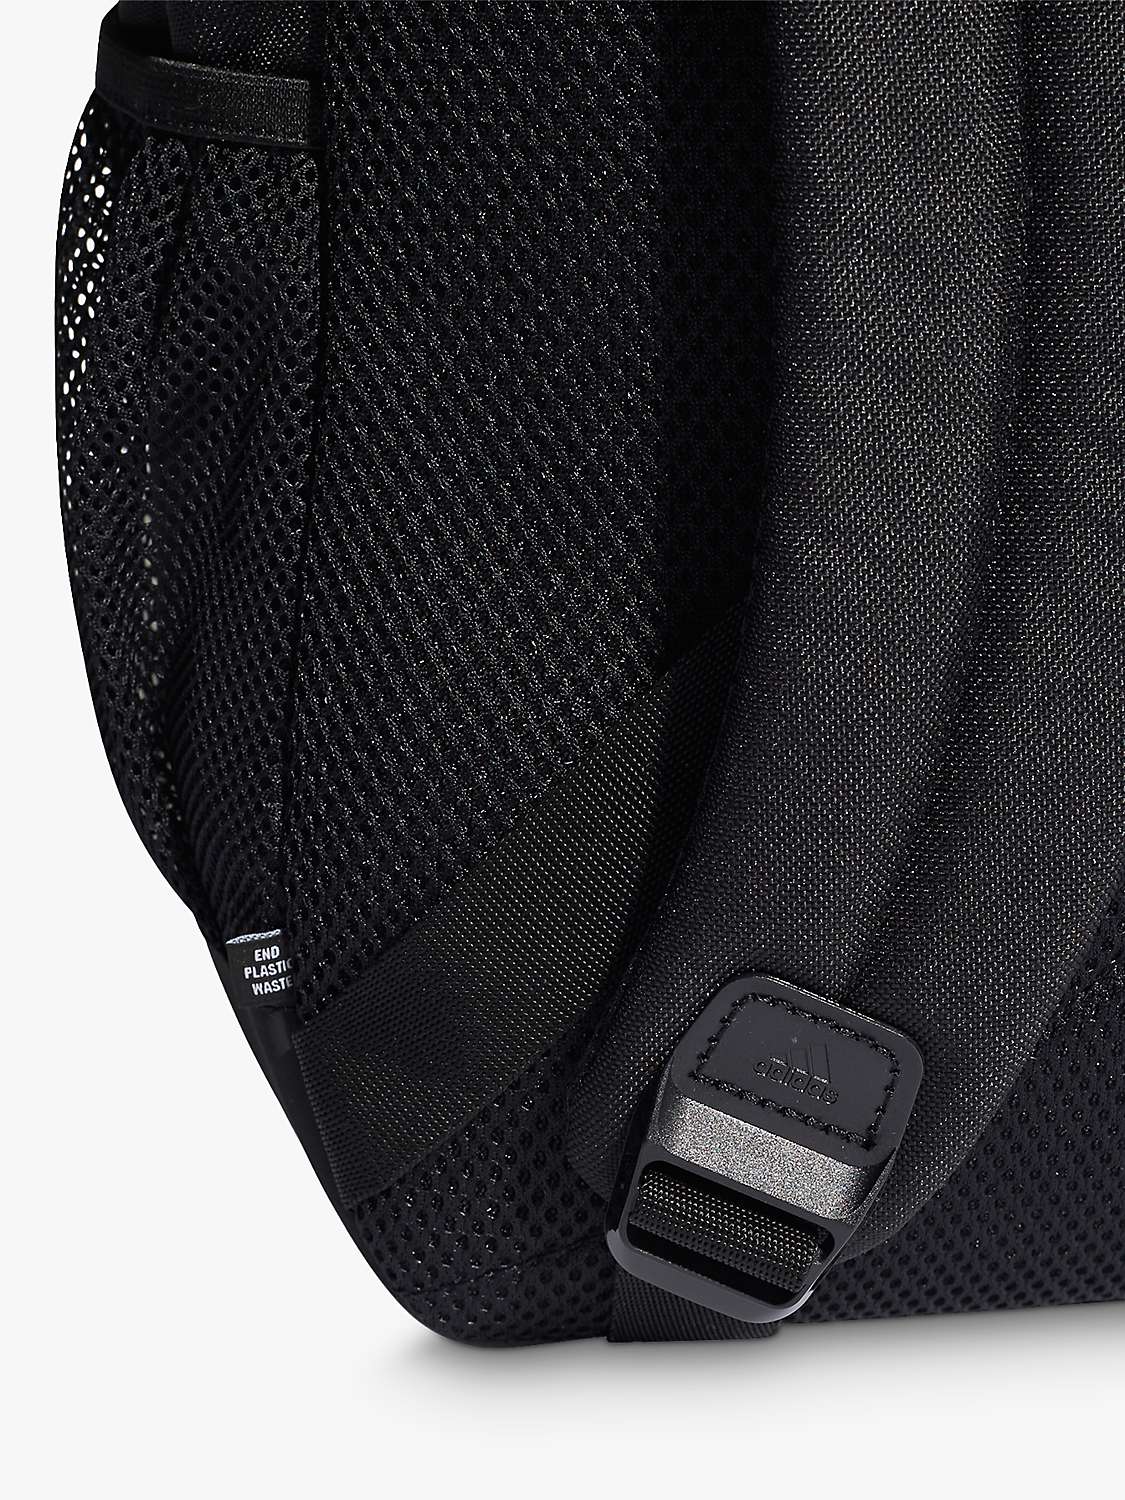 Buy adidas Power VI Recycled Backpack Online at johnlewis.com